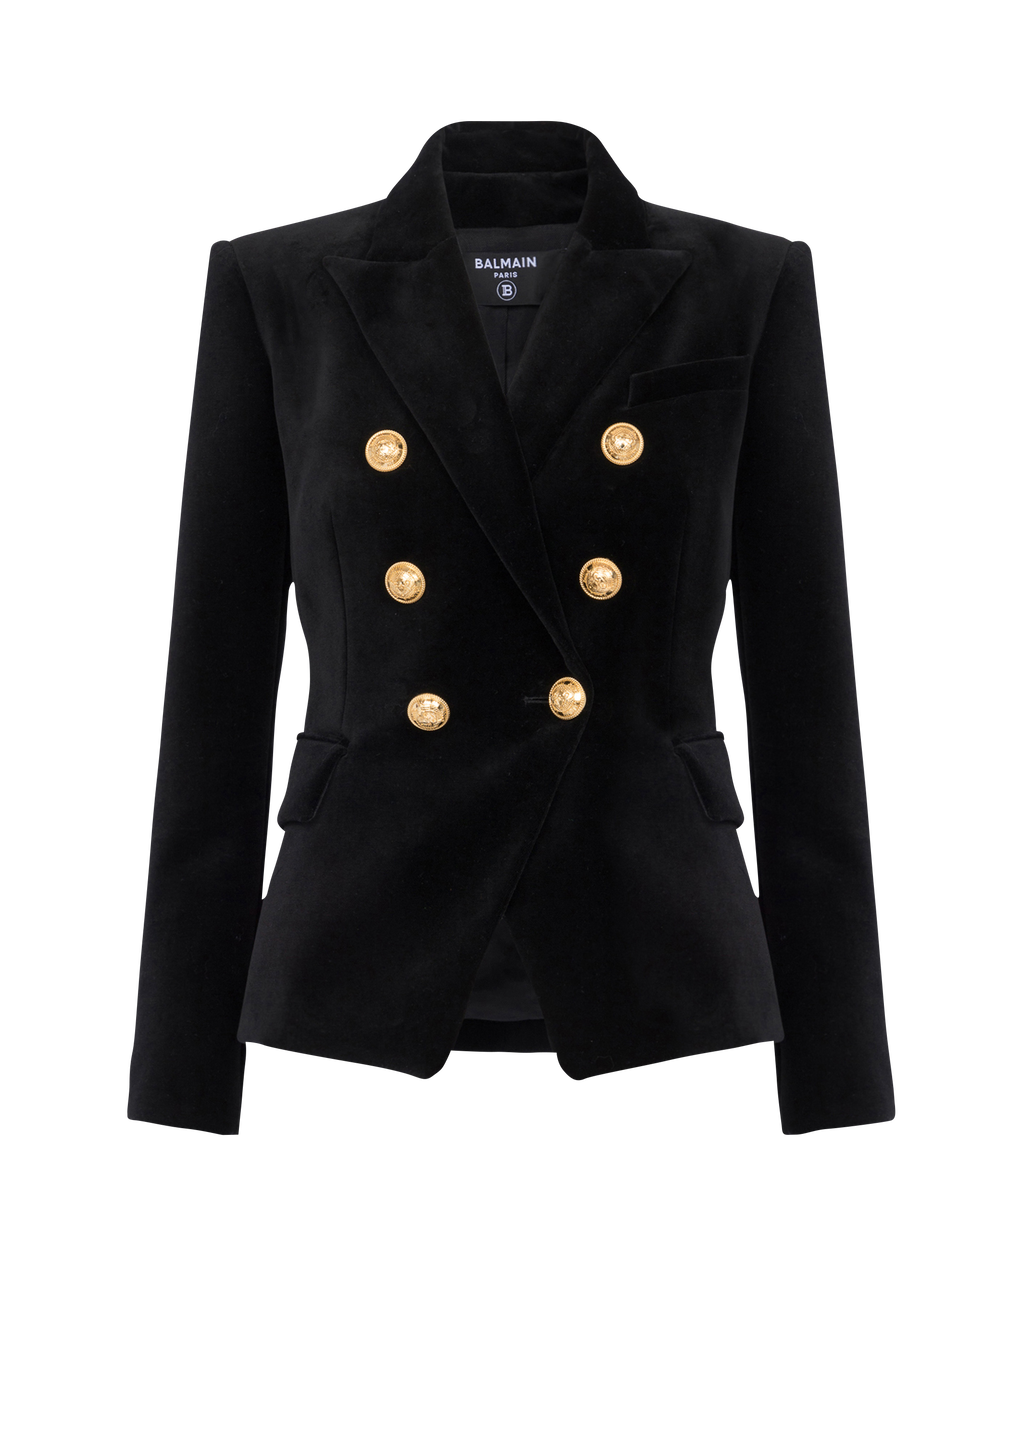 Velvet jacket with double-buttoned fastening, black, hi-res